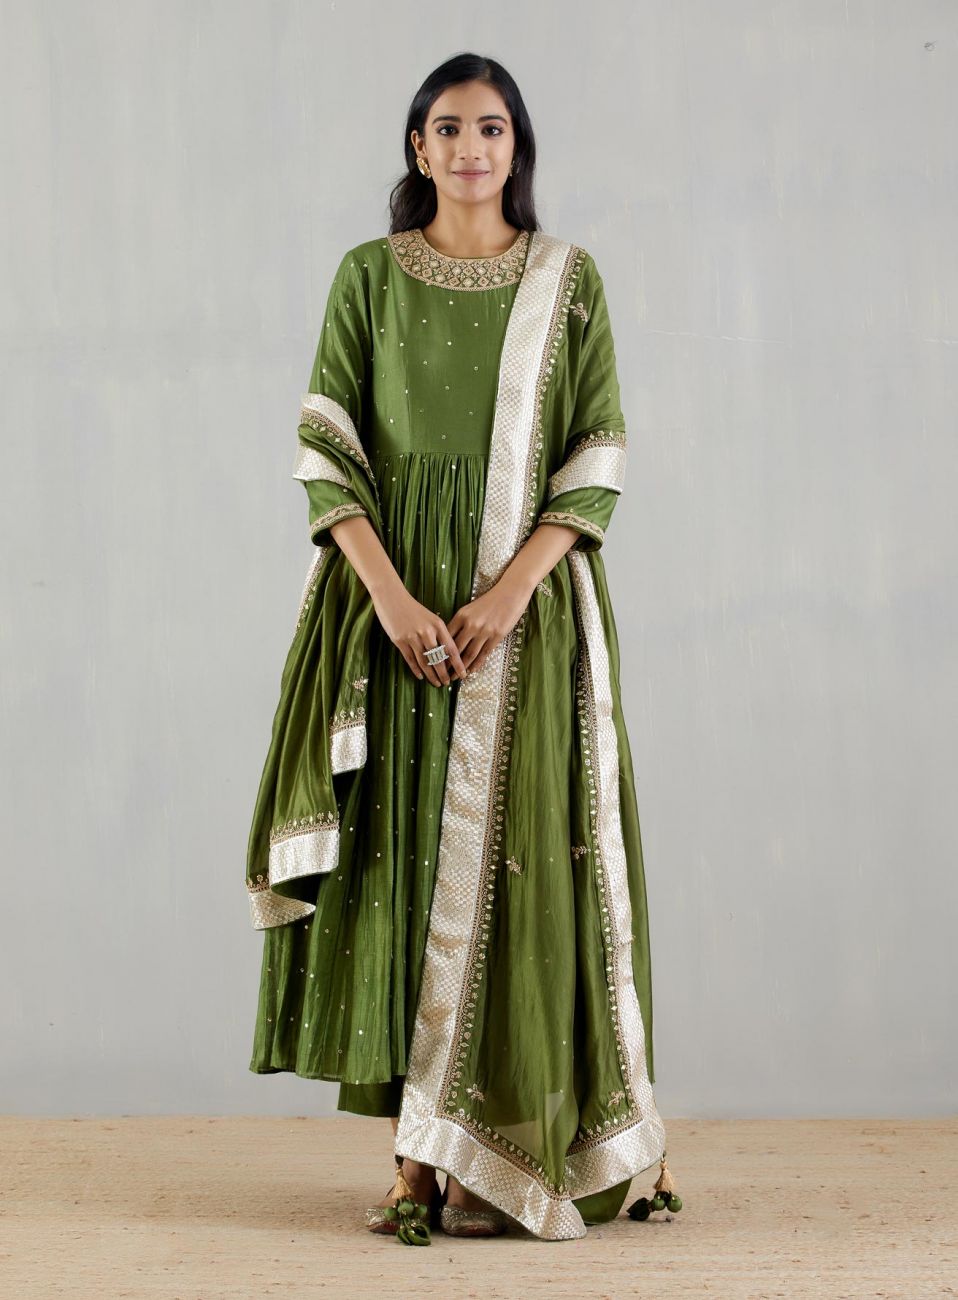 Green Embroidered Anarkali Set Indian Clothing in Denver, CO, Aurora, CO, Boulder, CO, Fort Collins, CO, Colorado Springs, CO, Parker, CO, Highlands Ranch, CO, Cherry Creek, CO, Centennial, CO, and Longmont, CO. NATIONWIDE SHIPPING USA- India Fashion X